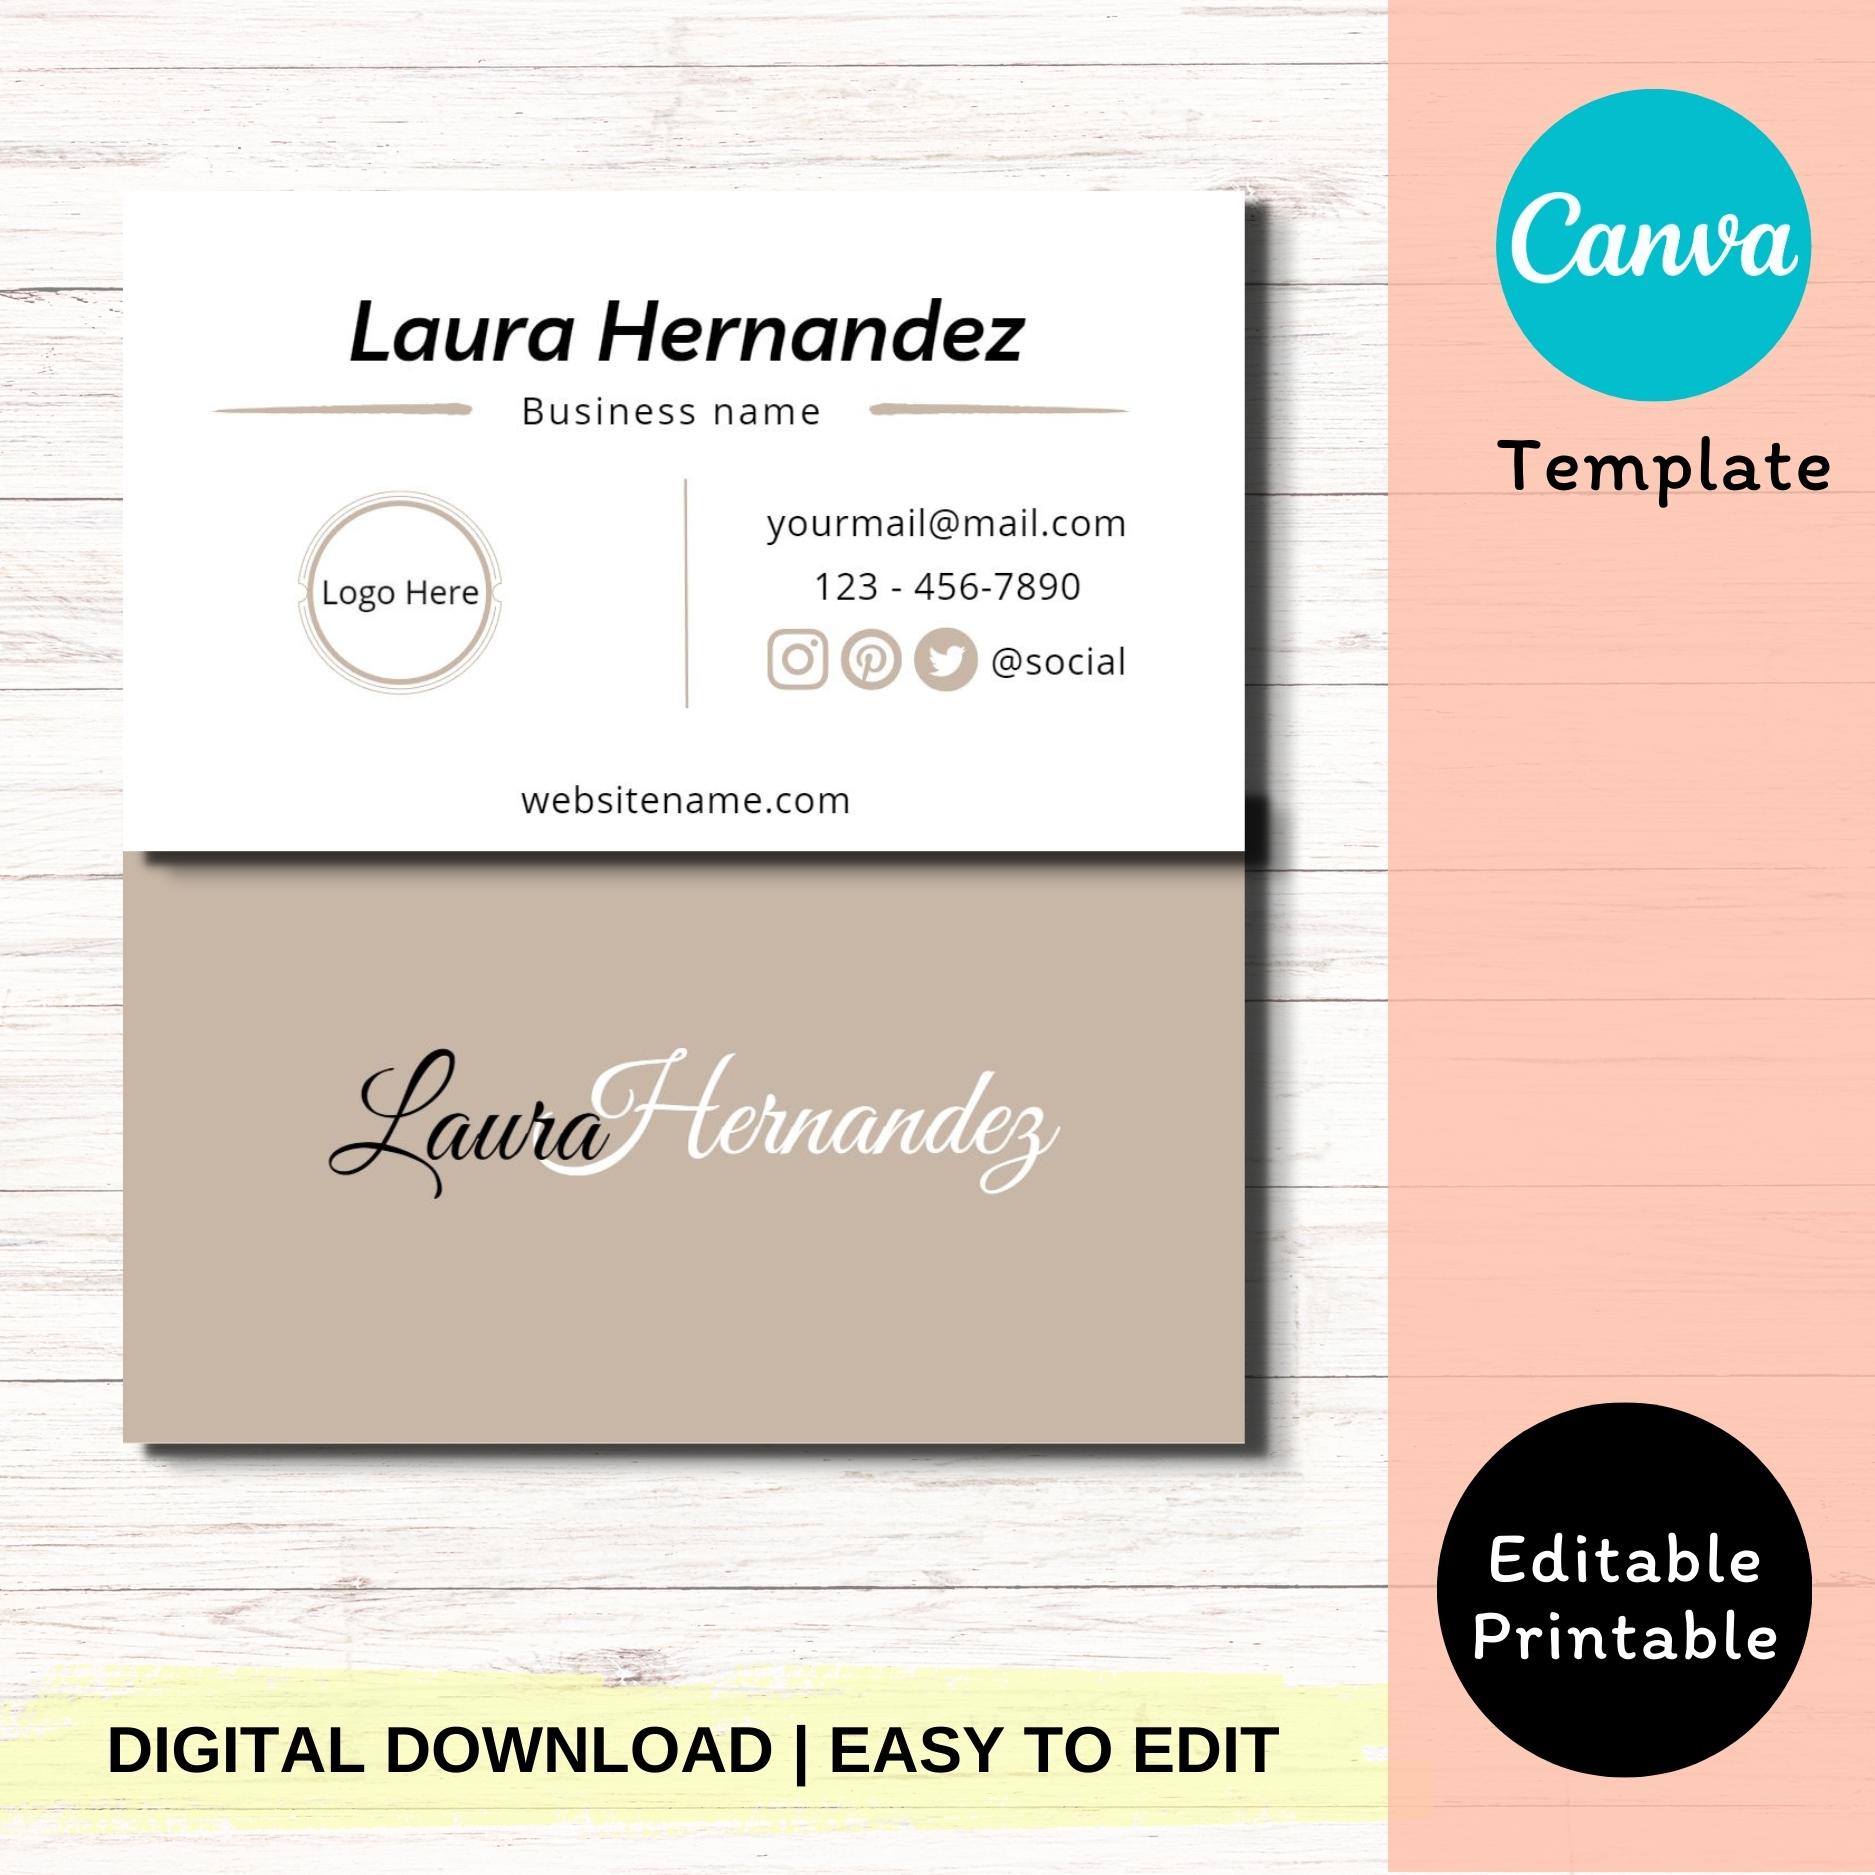 Create Professional Business Cards in Minutes with Canva